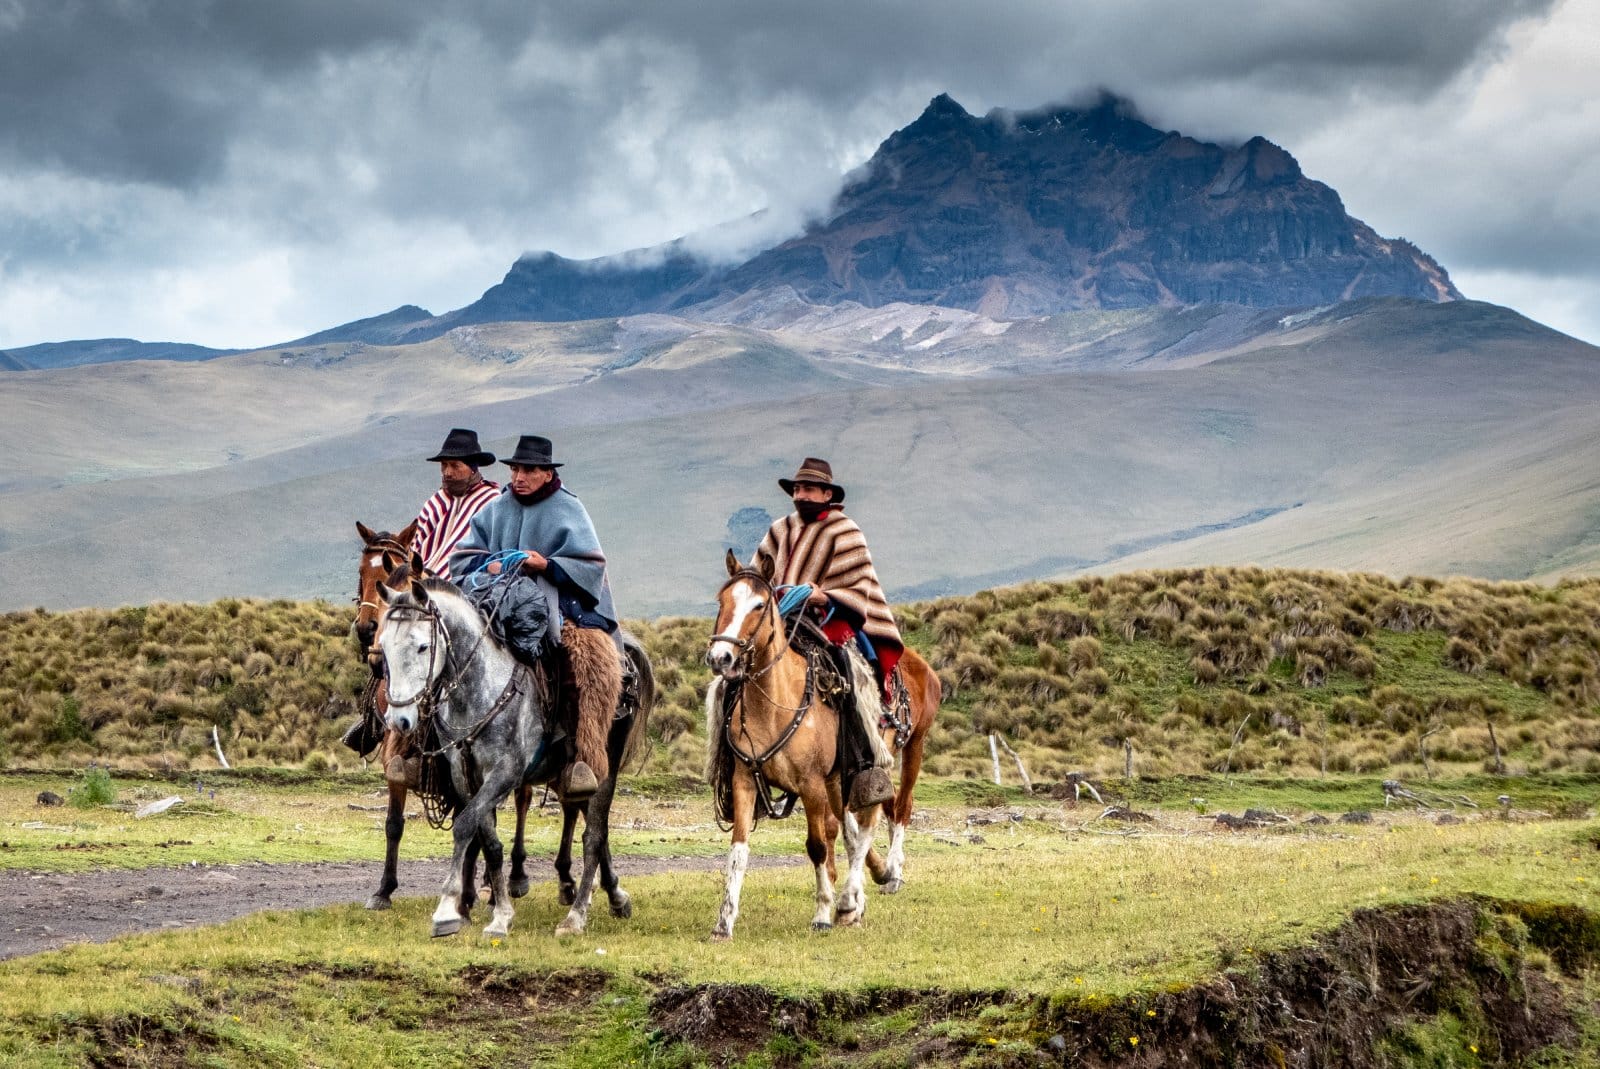 <p class="wp-caption-text">Image Credit: Shutterstock / Sunart Media</p>  <p>Saddle up and explore the majestic beauty of the Andes Mountains on a horseback riding excursion in Peru. Gallop through verdant valleys, cross rushing rivers, and immerse yourself in the rich cultural heritage of the Quechua people who call this rugged landscape home.</p>